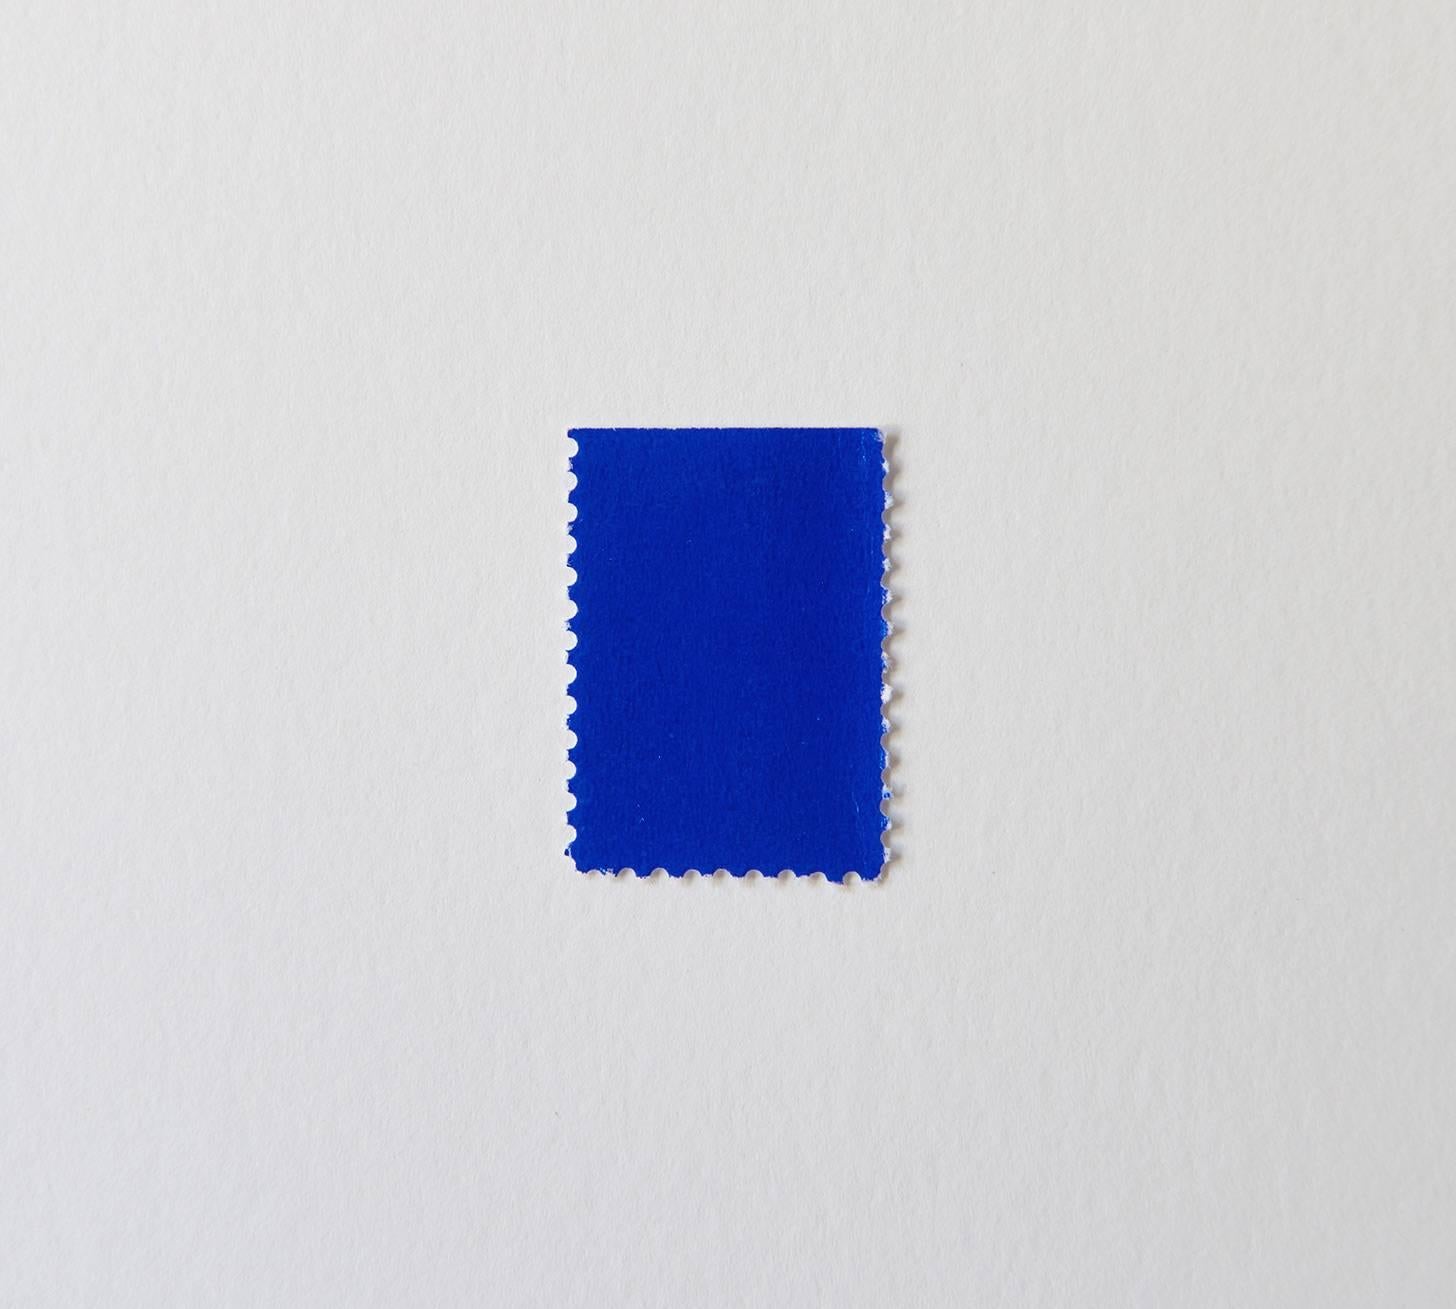 Effectively an Yves Klein painting in miniature, this stamp is from a series Klein made in 1957 by painting blocks of blank stamps with what was to become his famous signature, the patented blue pigment officially registered as IKB, or International